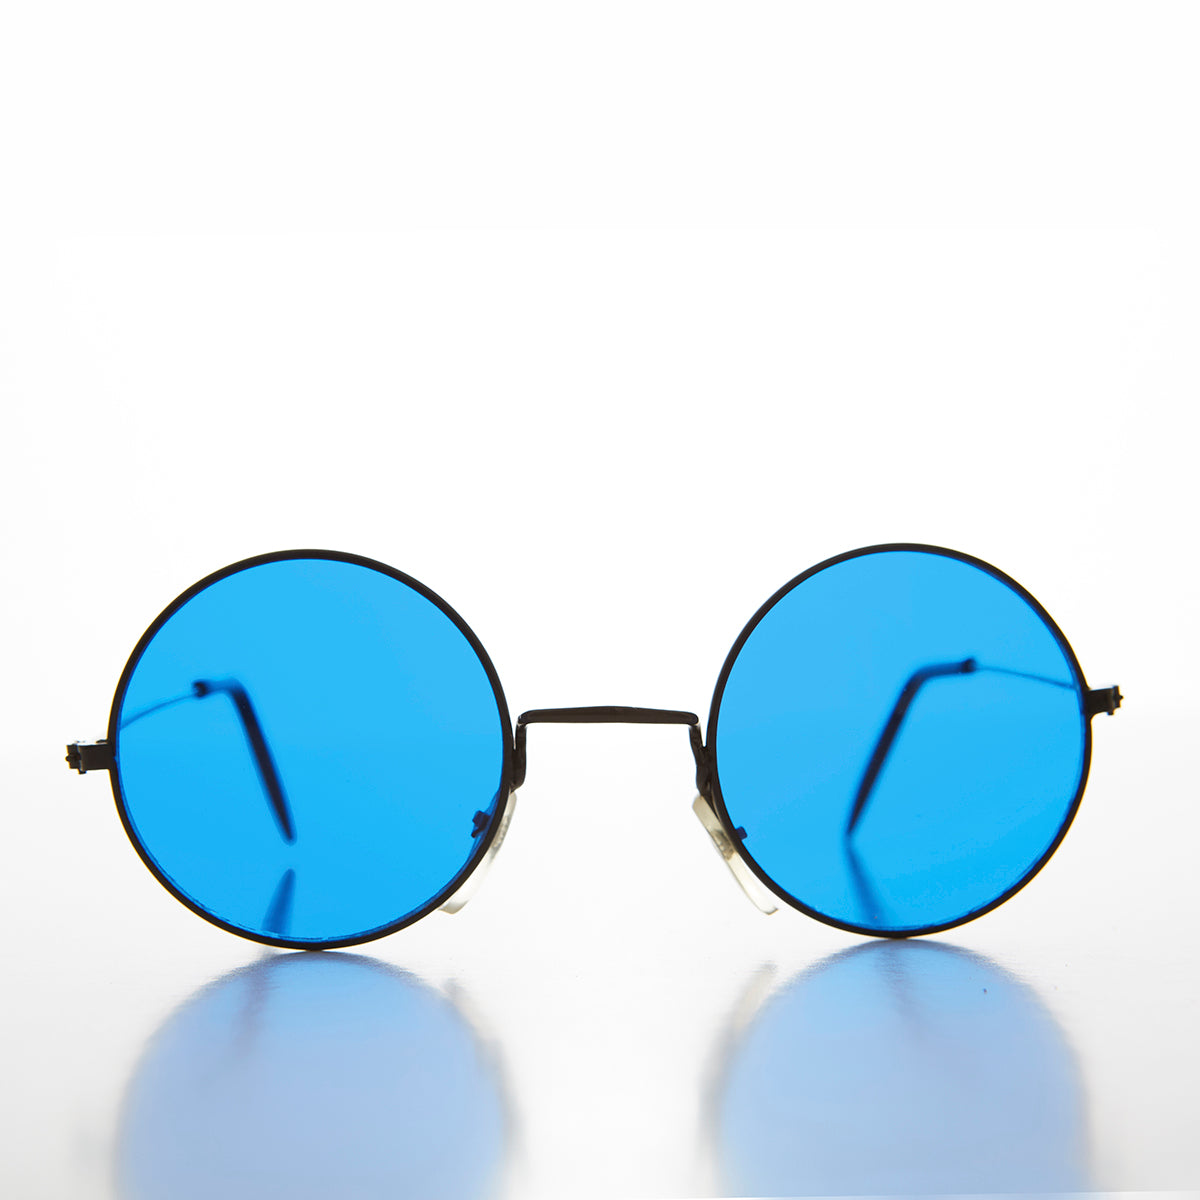 Round Circle Sunglass with Blue Color Tinted Lens